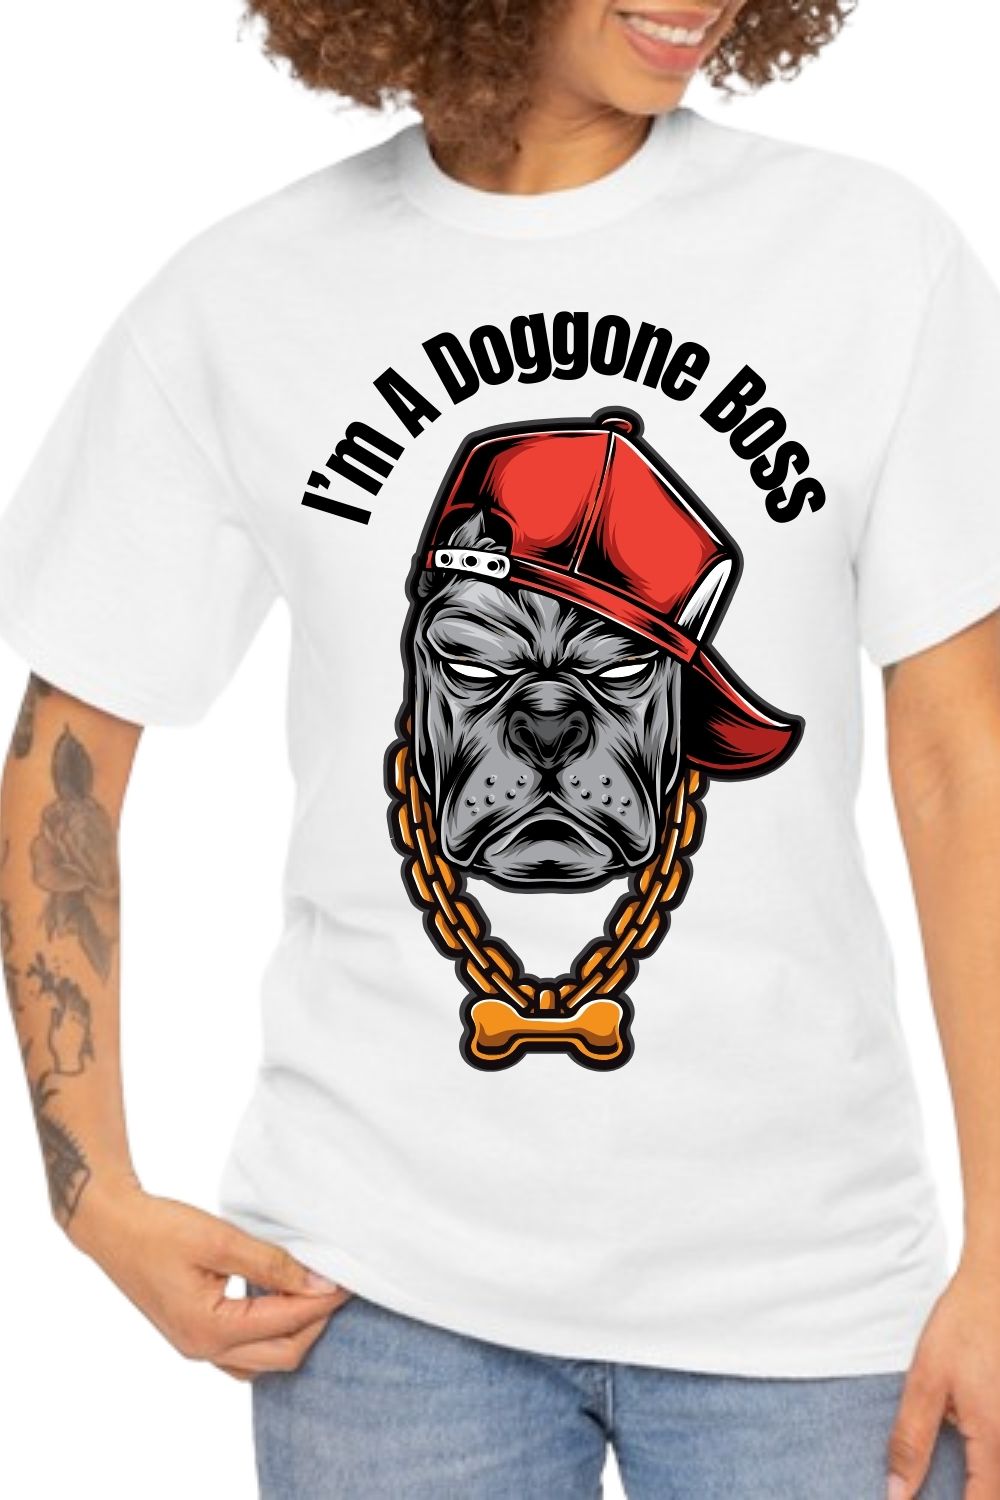 Fun and stylish design “I’m a doggone boss” pinterest preview image.